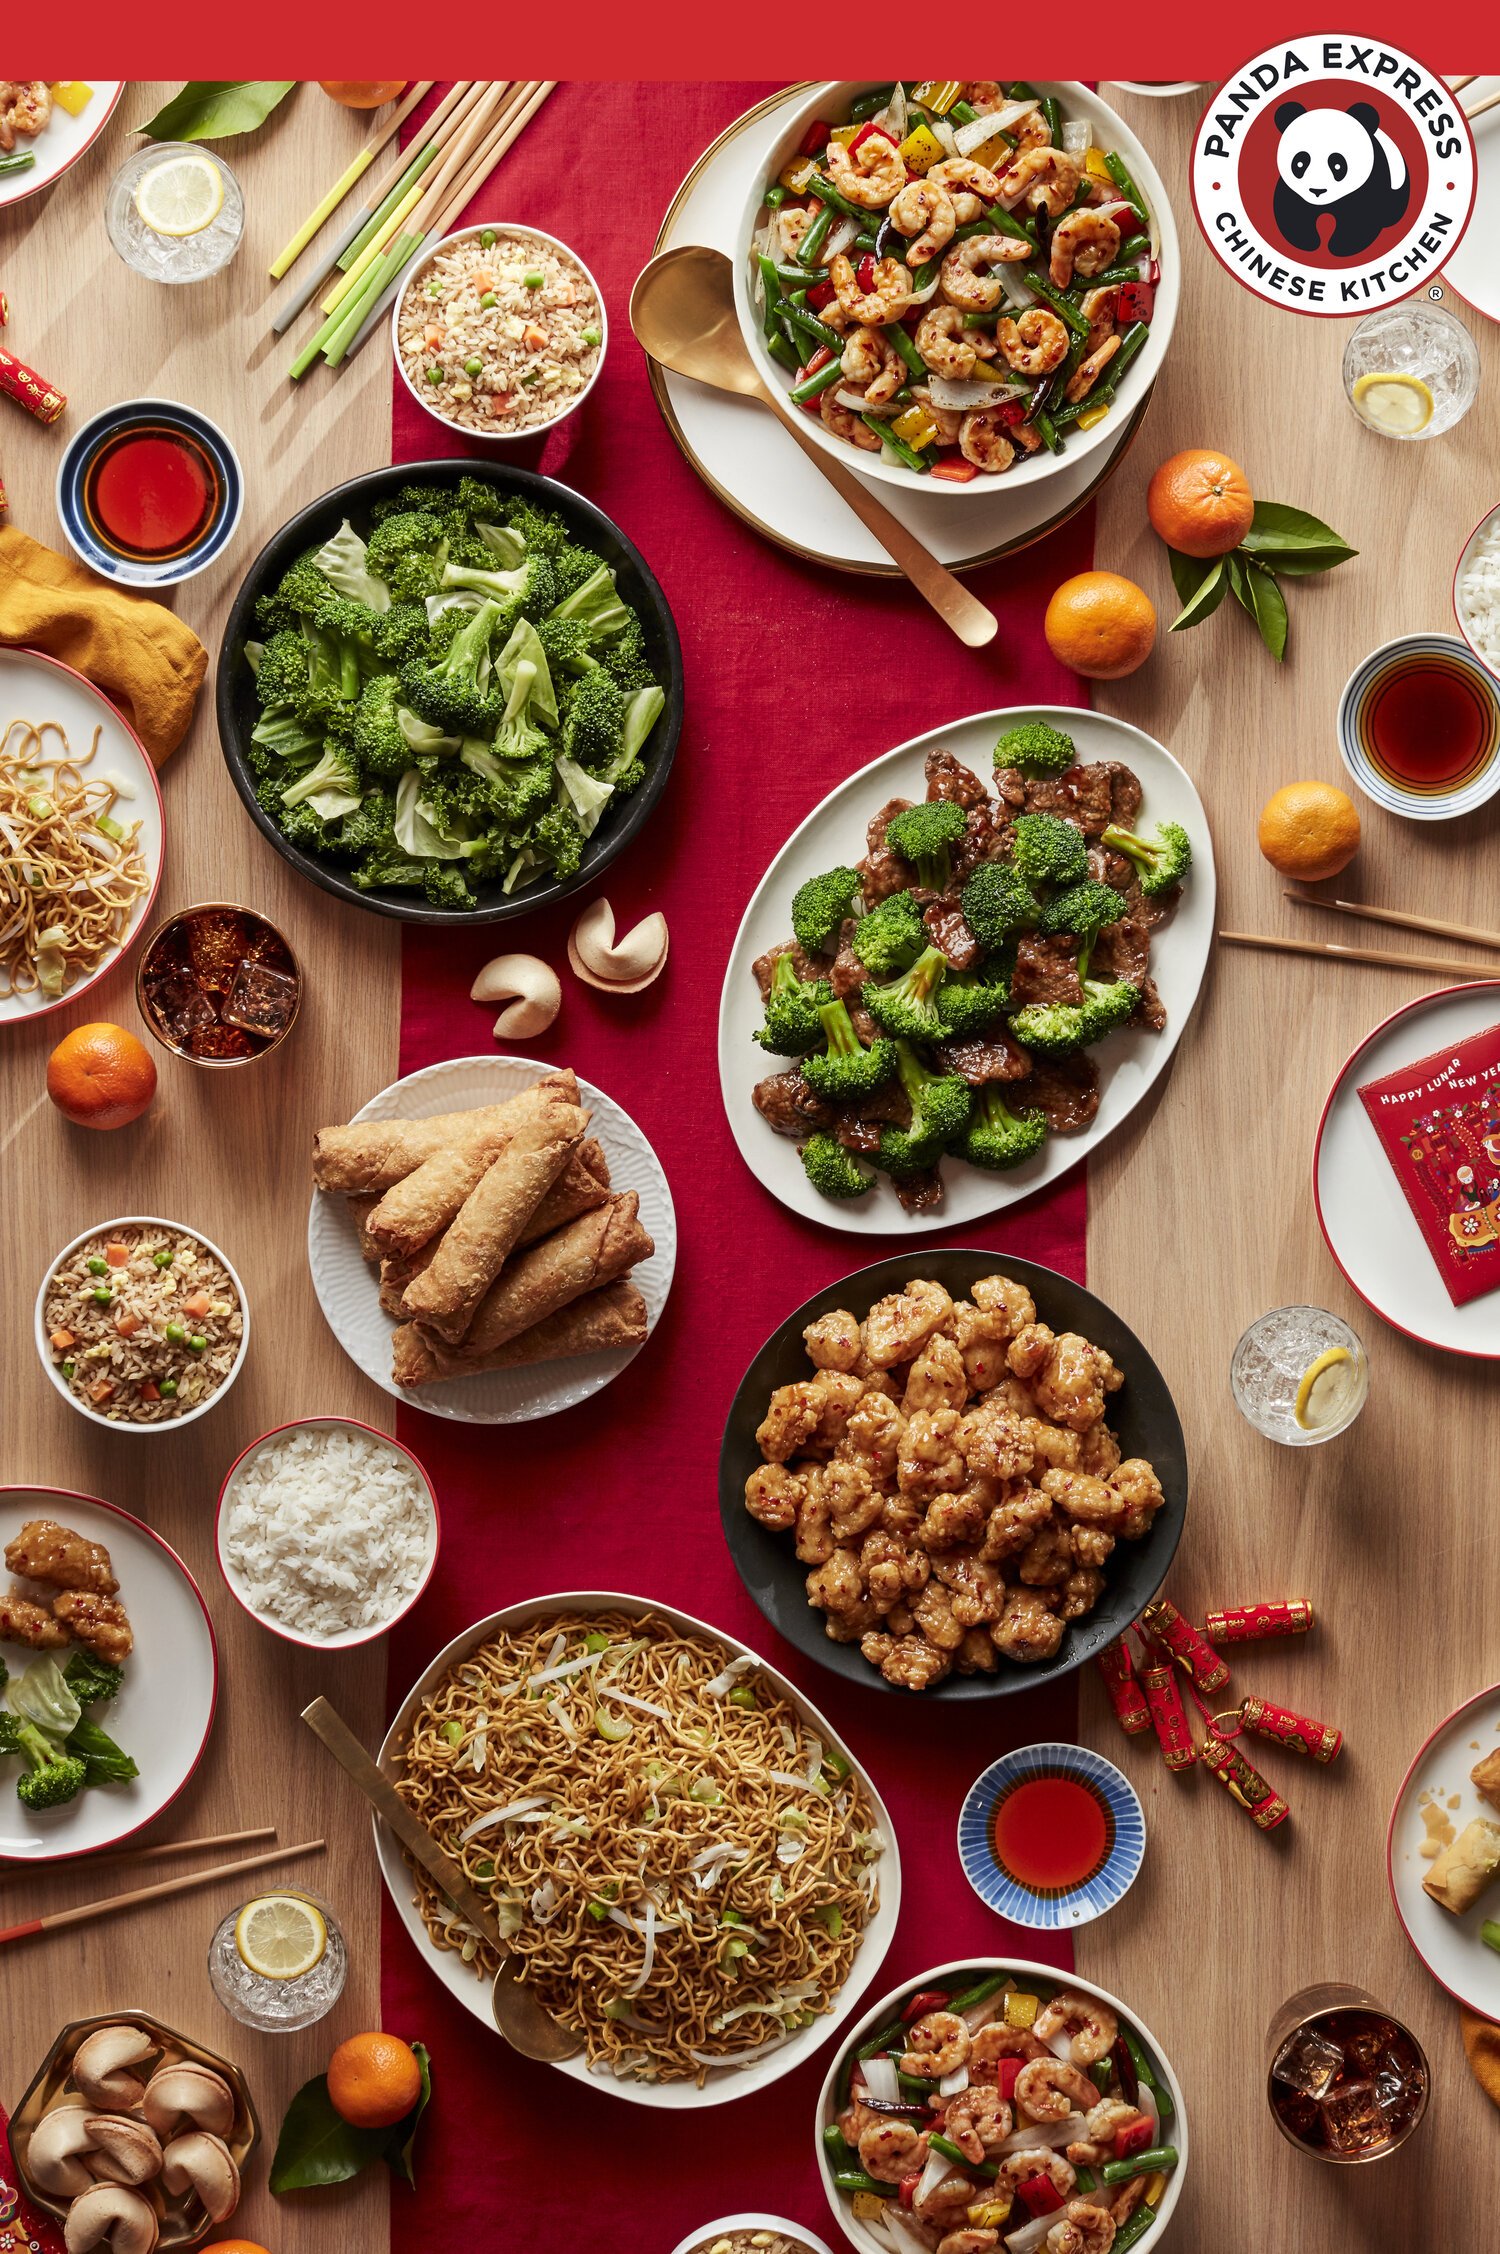 Panda Express Delicious American Chinese Cuisine Order Online Food Photographer_03.jpg